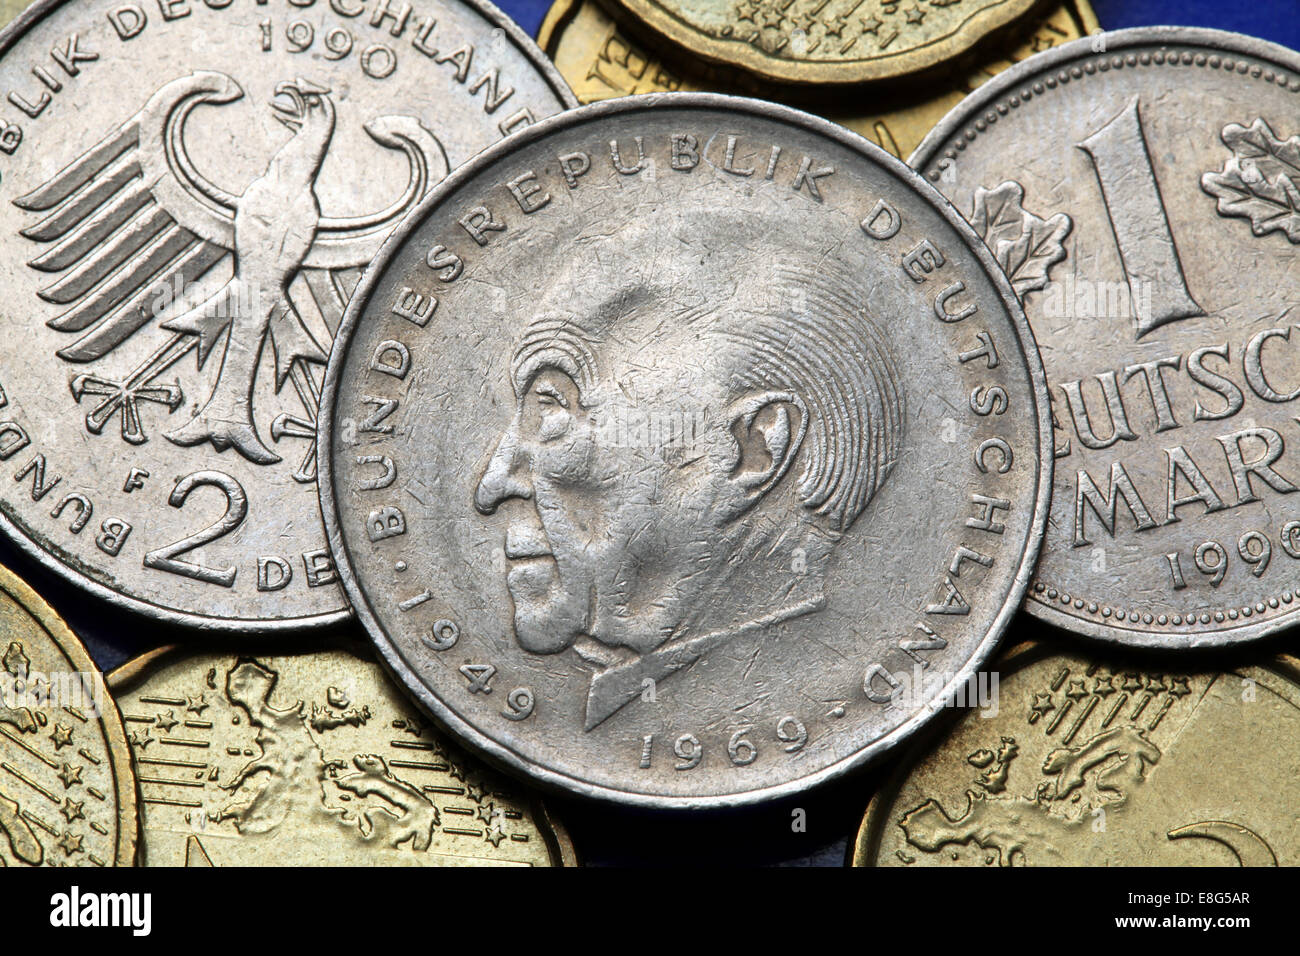 Coins of Germany. German statesman Konrad Adenauer and the German eagle depicted in old Deutsche Mark coins. Stock Photo